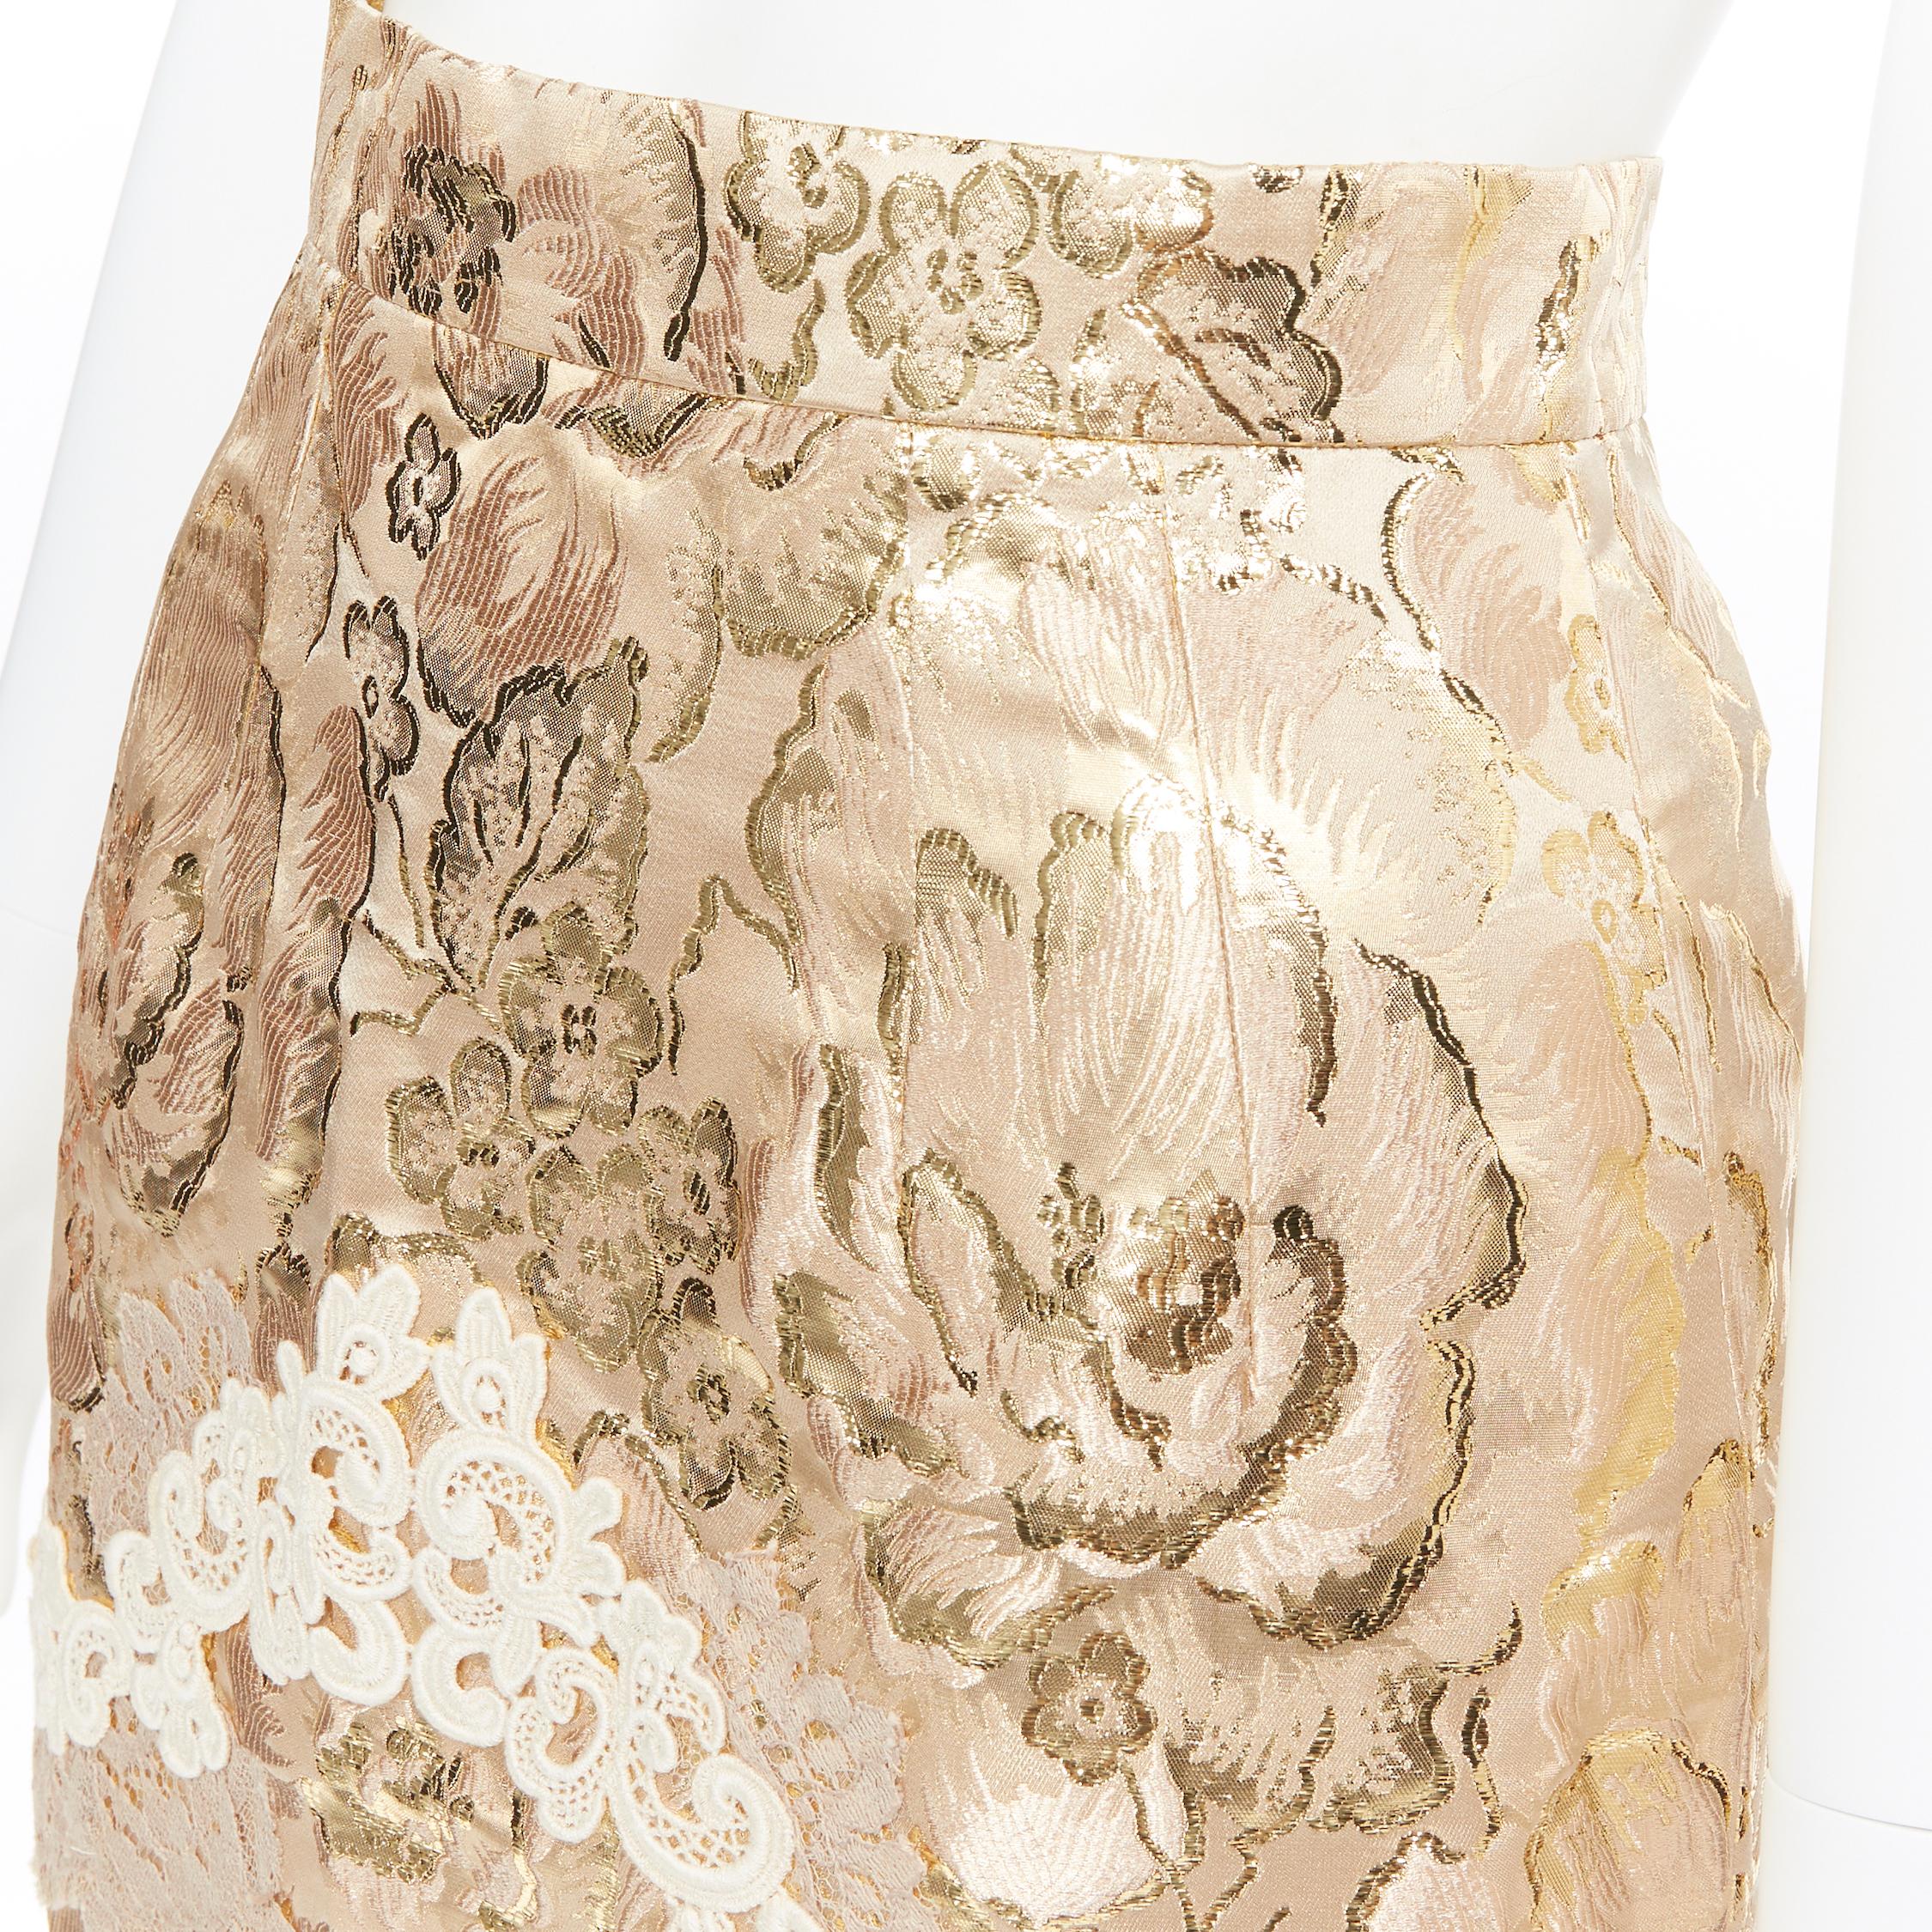 Women's new DOLCE GABBANA metallic gold lace applique floral brocade fitted skirt IT36